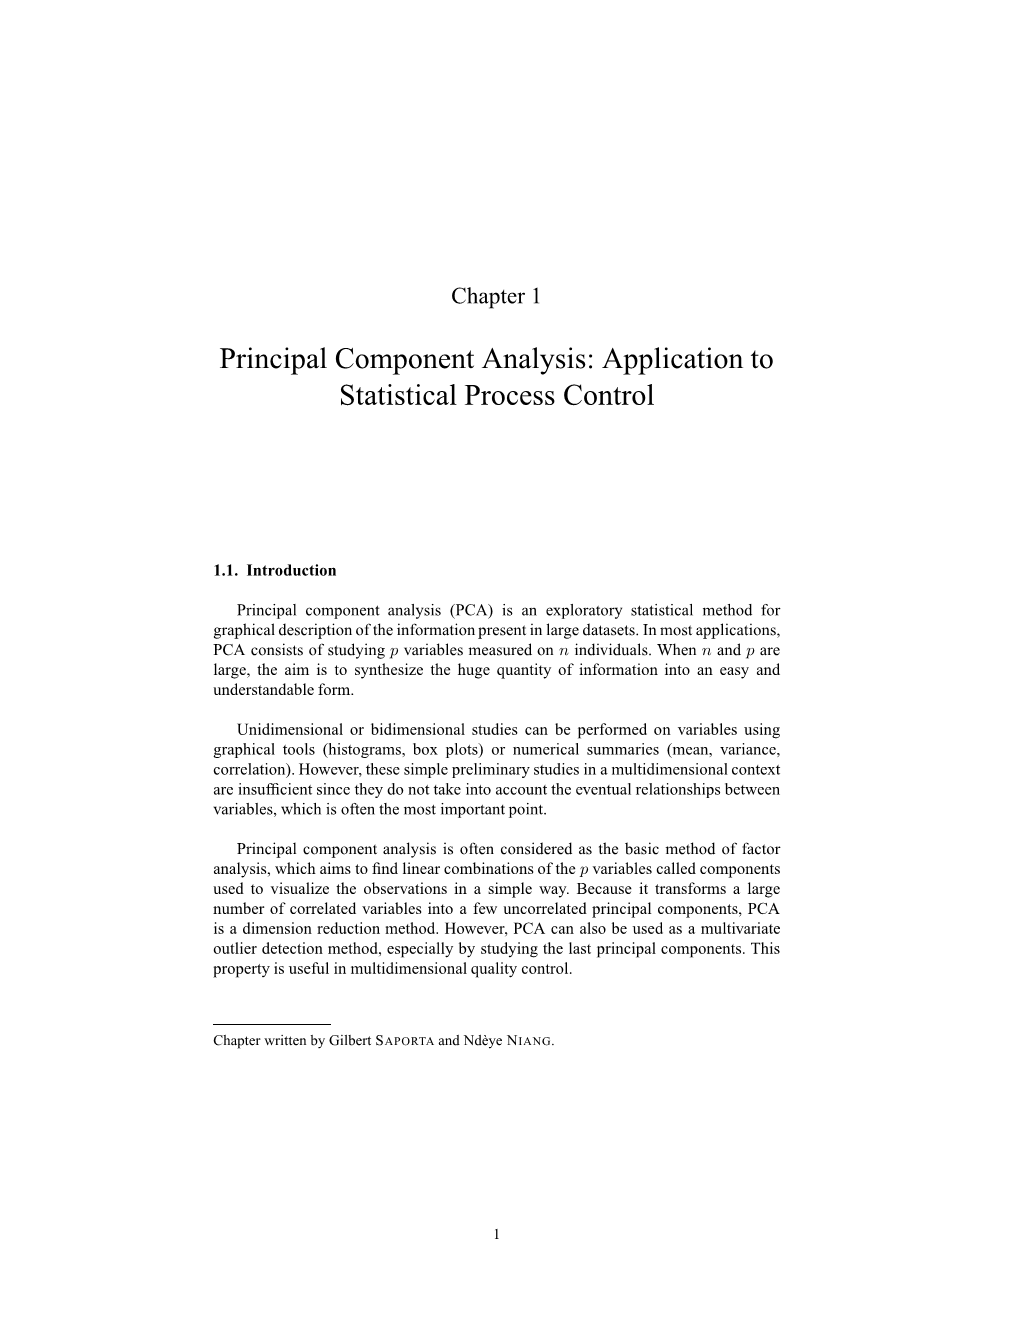 Principal Component Analysis: Application to Statistical Process Control